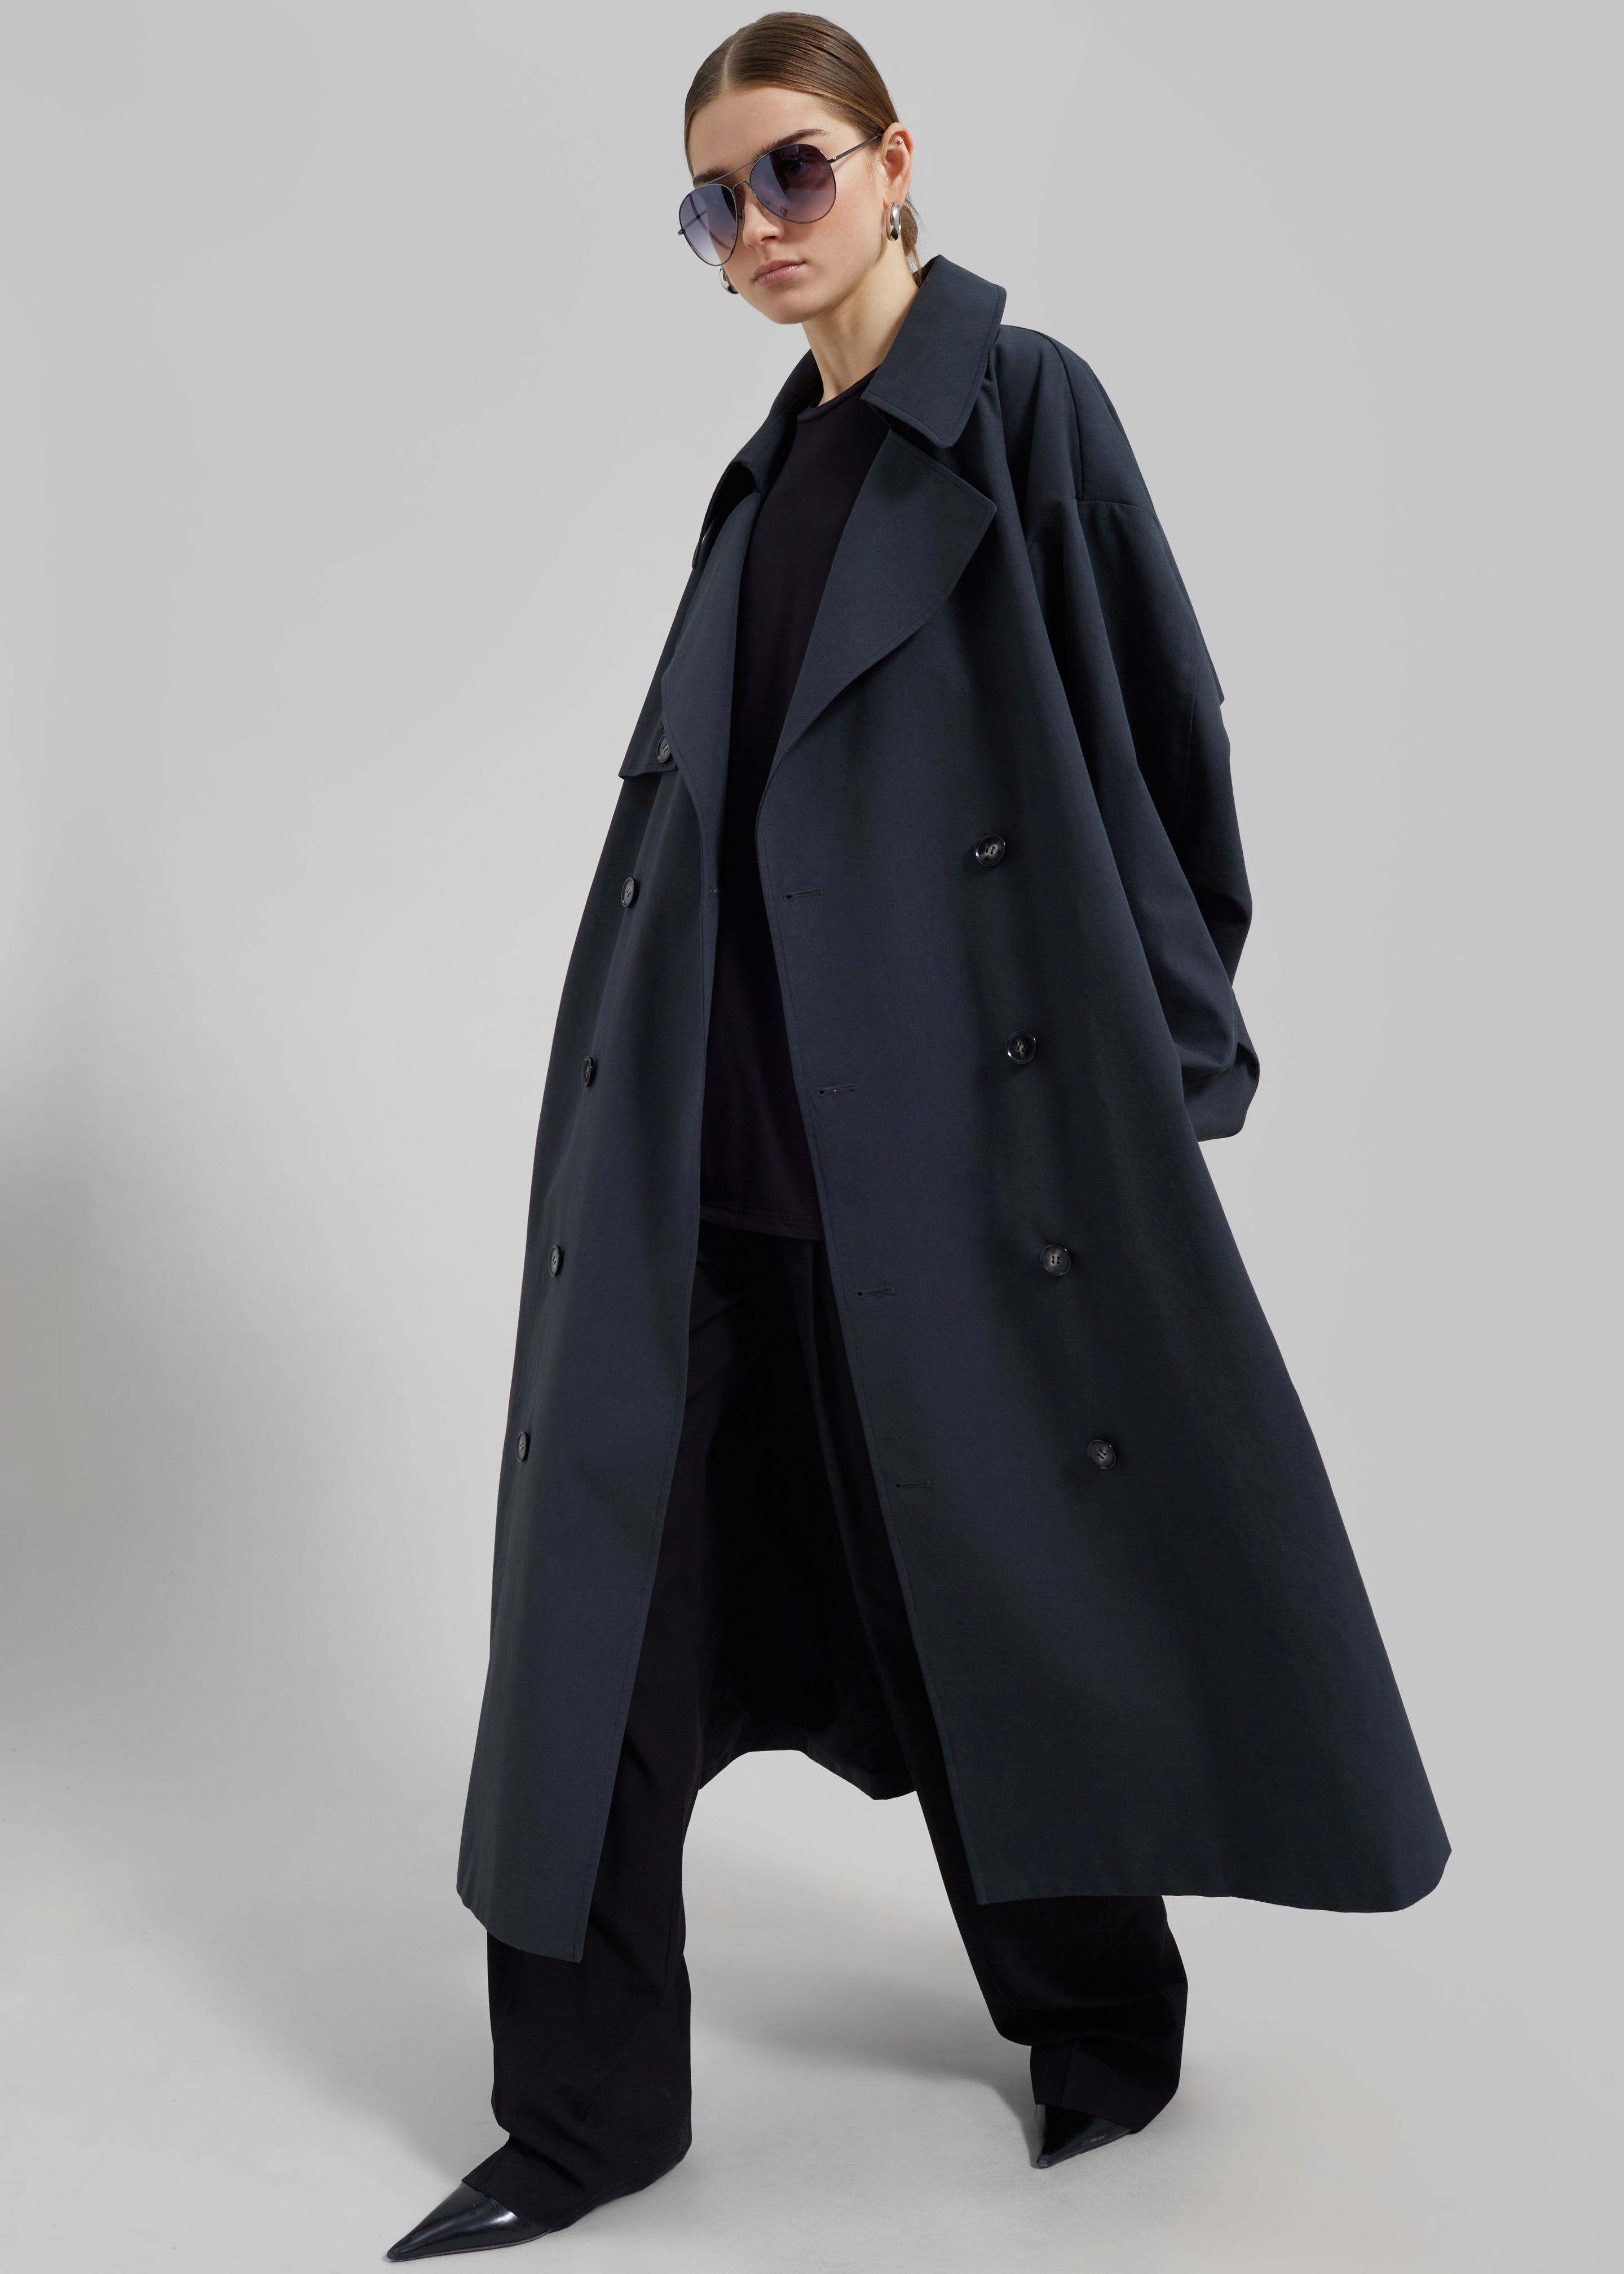 Anika Double Breasted Trench Coat - Navy - 4